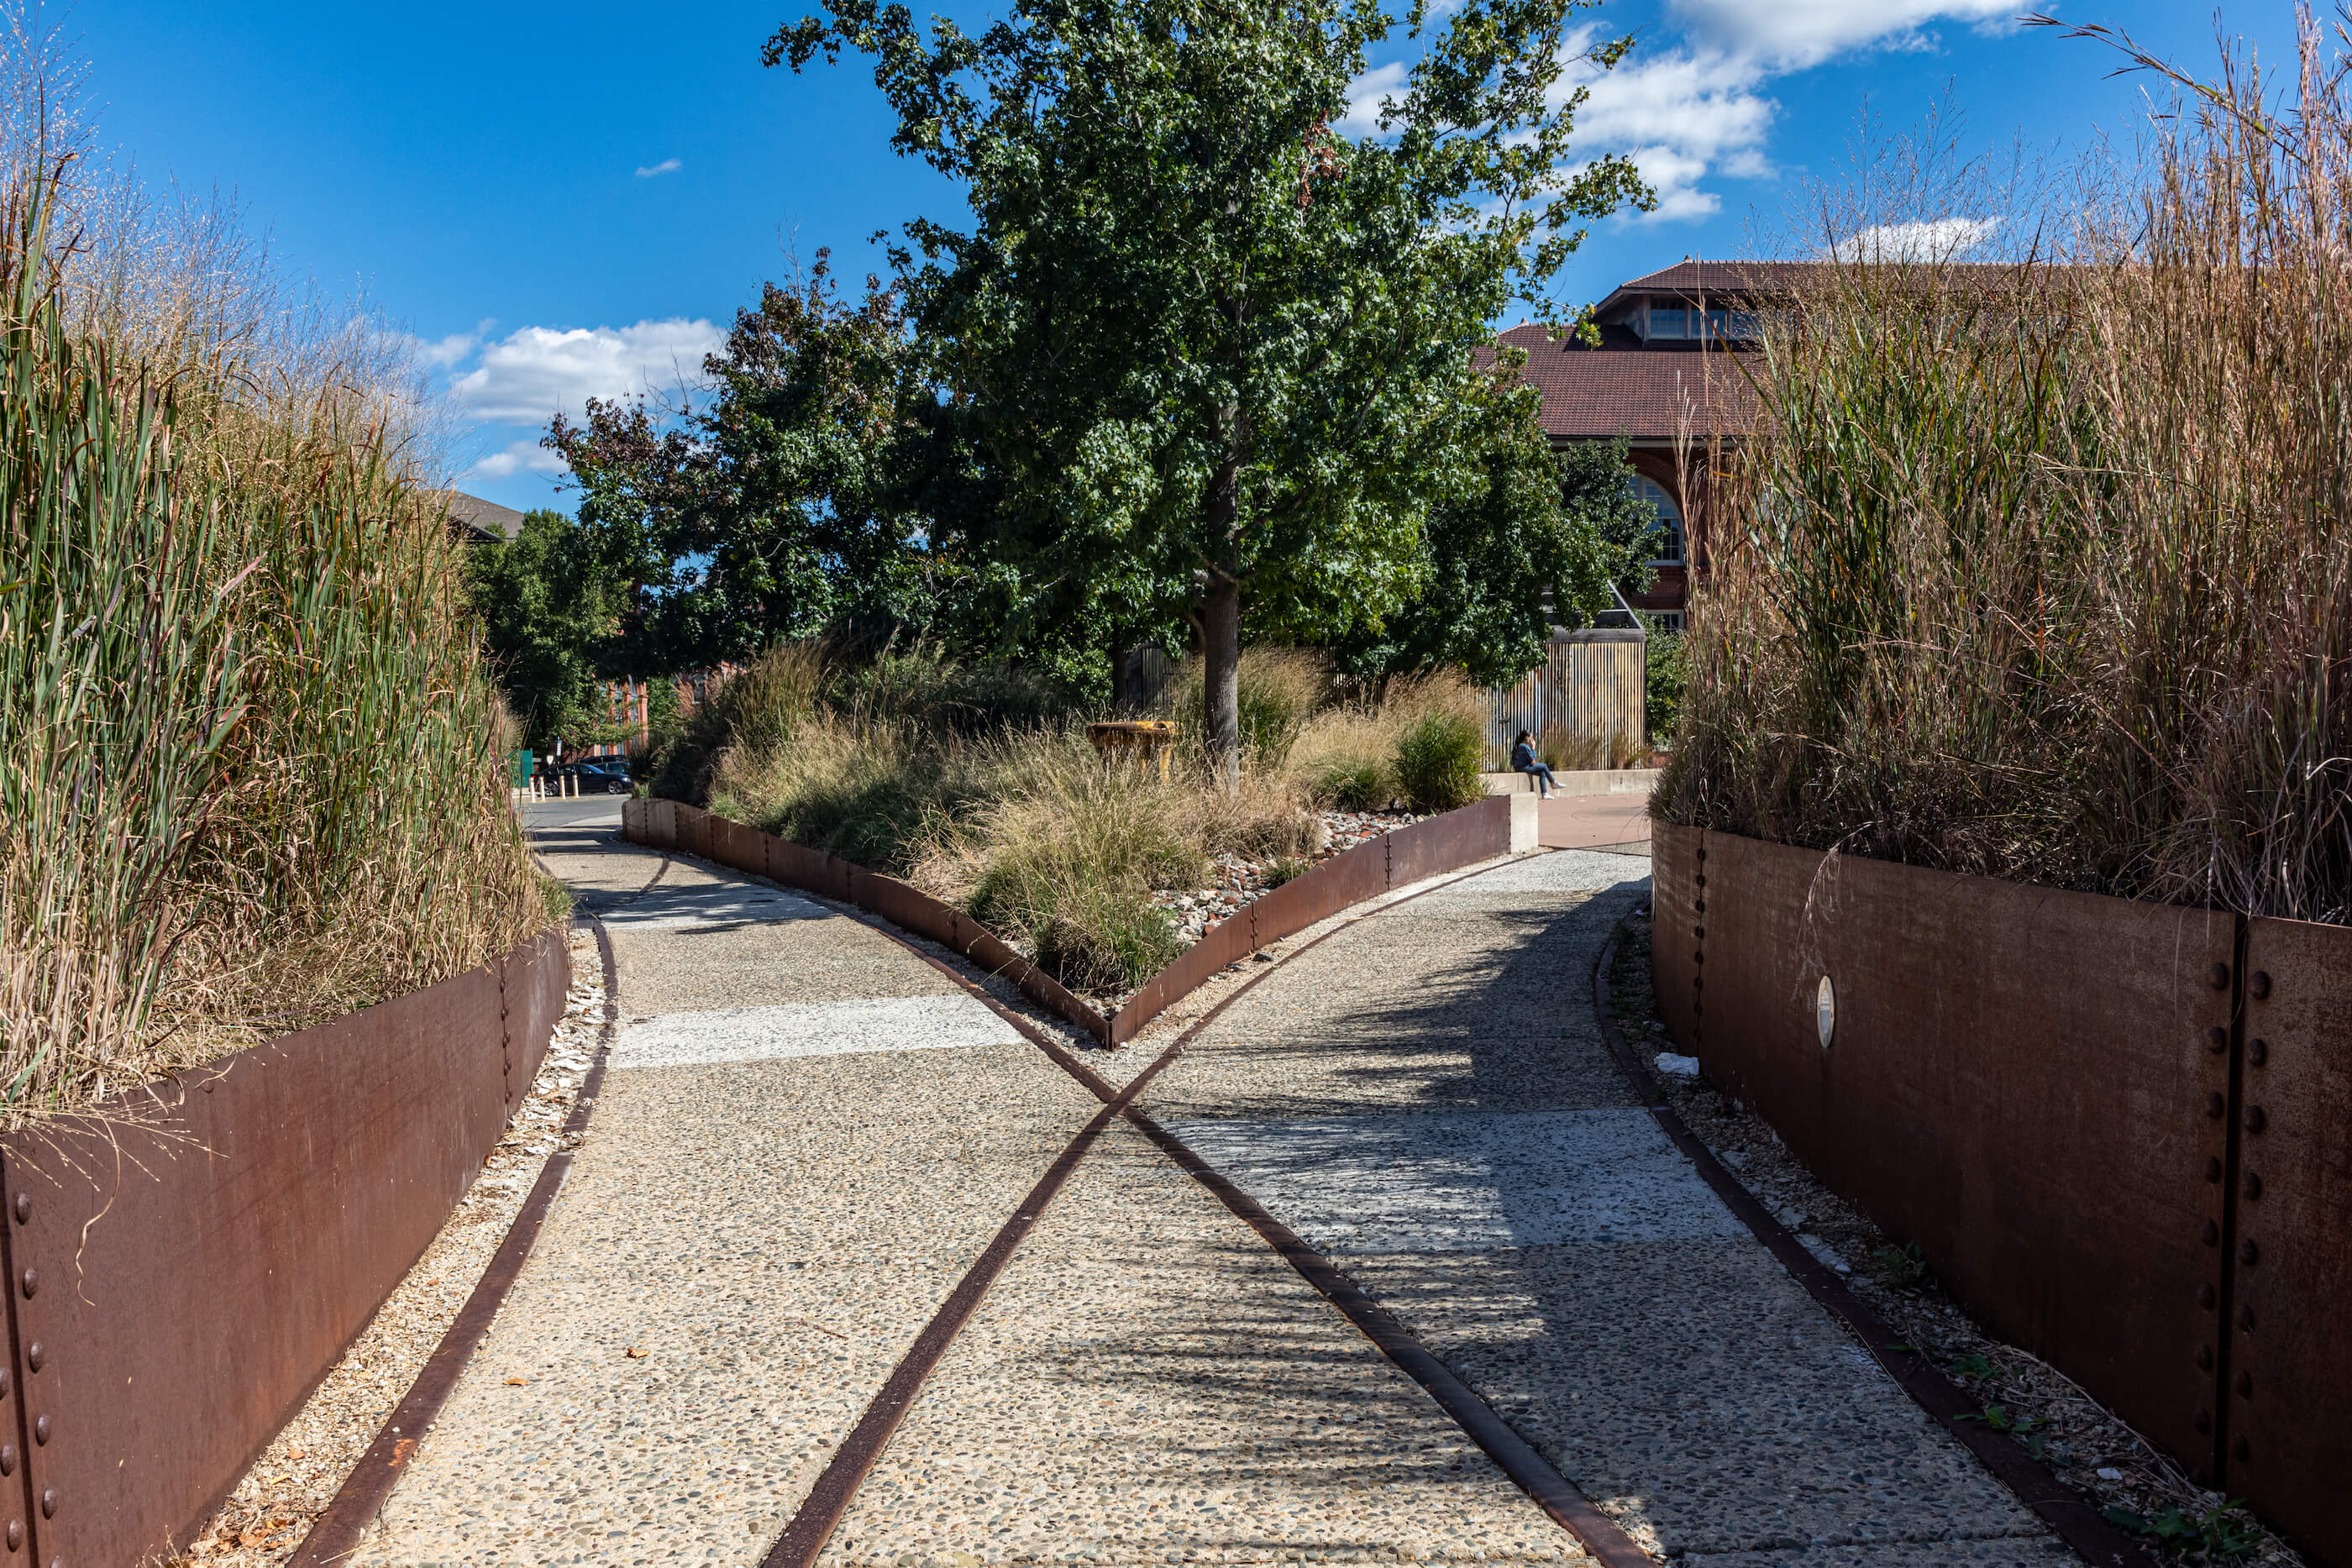 a corporate campus with uncovered old railway tracks